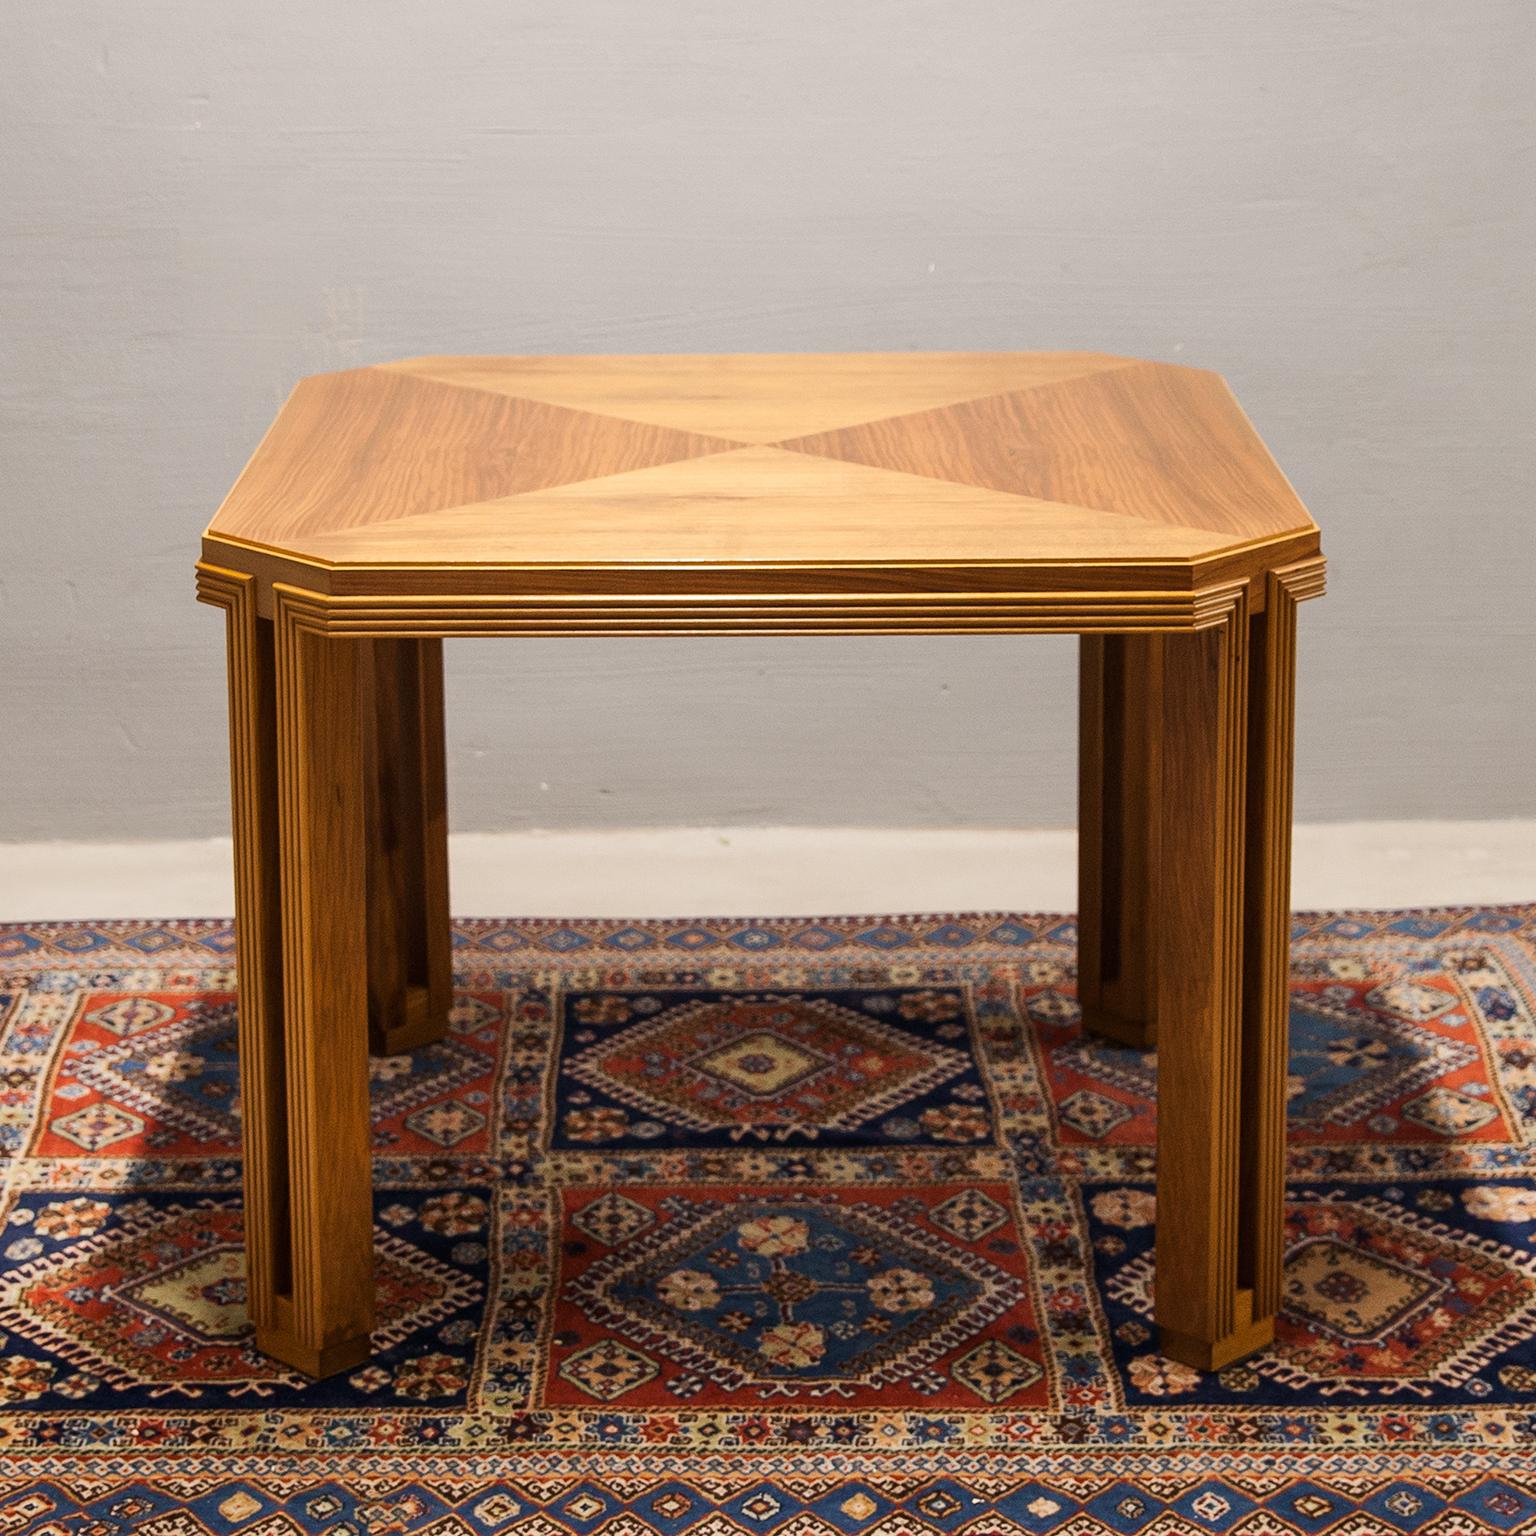 Wonderful dining table, salon table with elegant oak inlays and four beautifully crafted legs. A highlight in every entrance area or dining room.